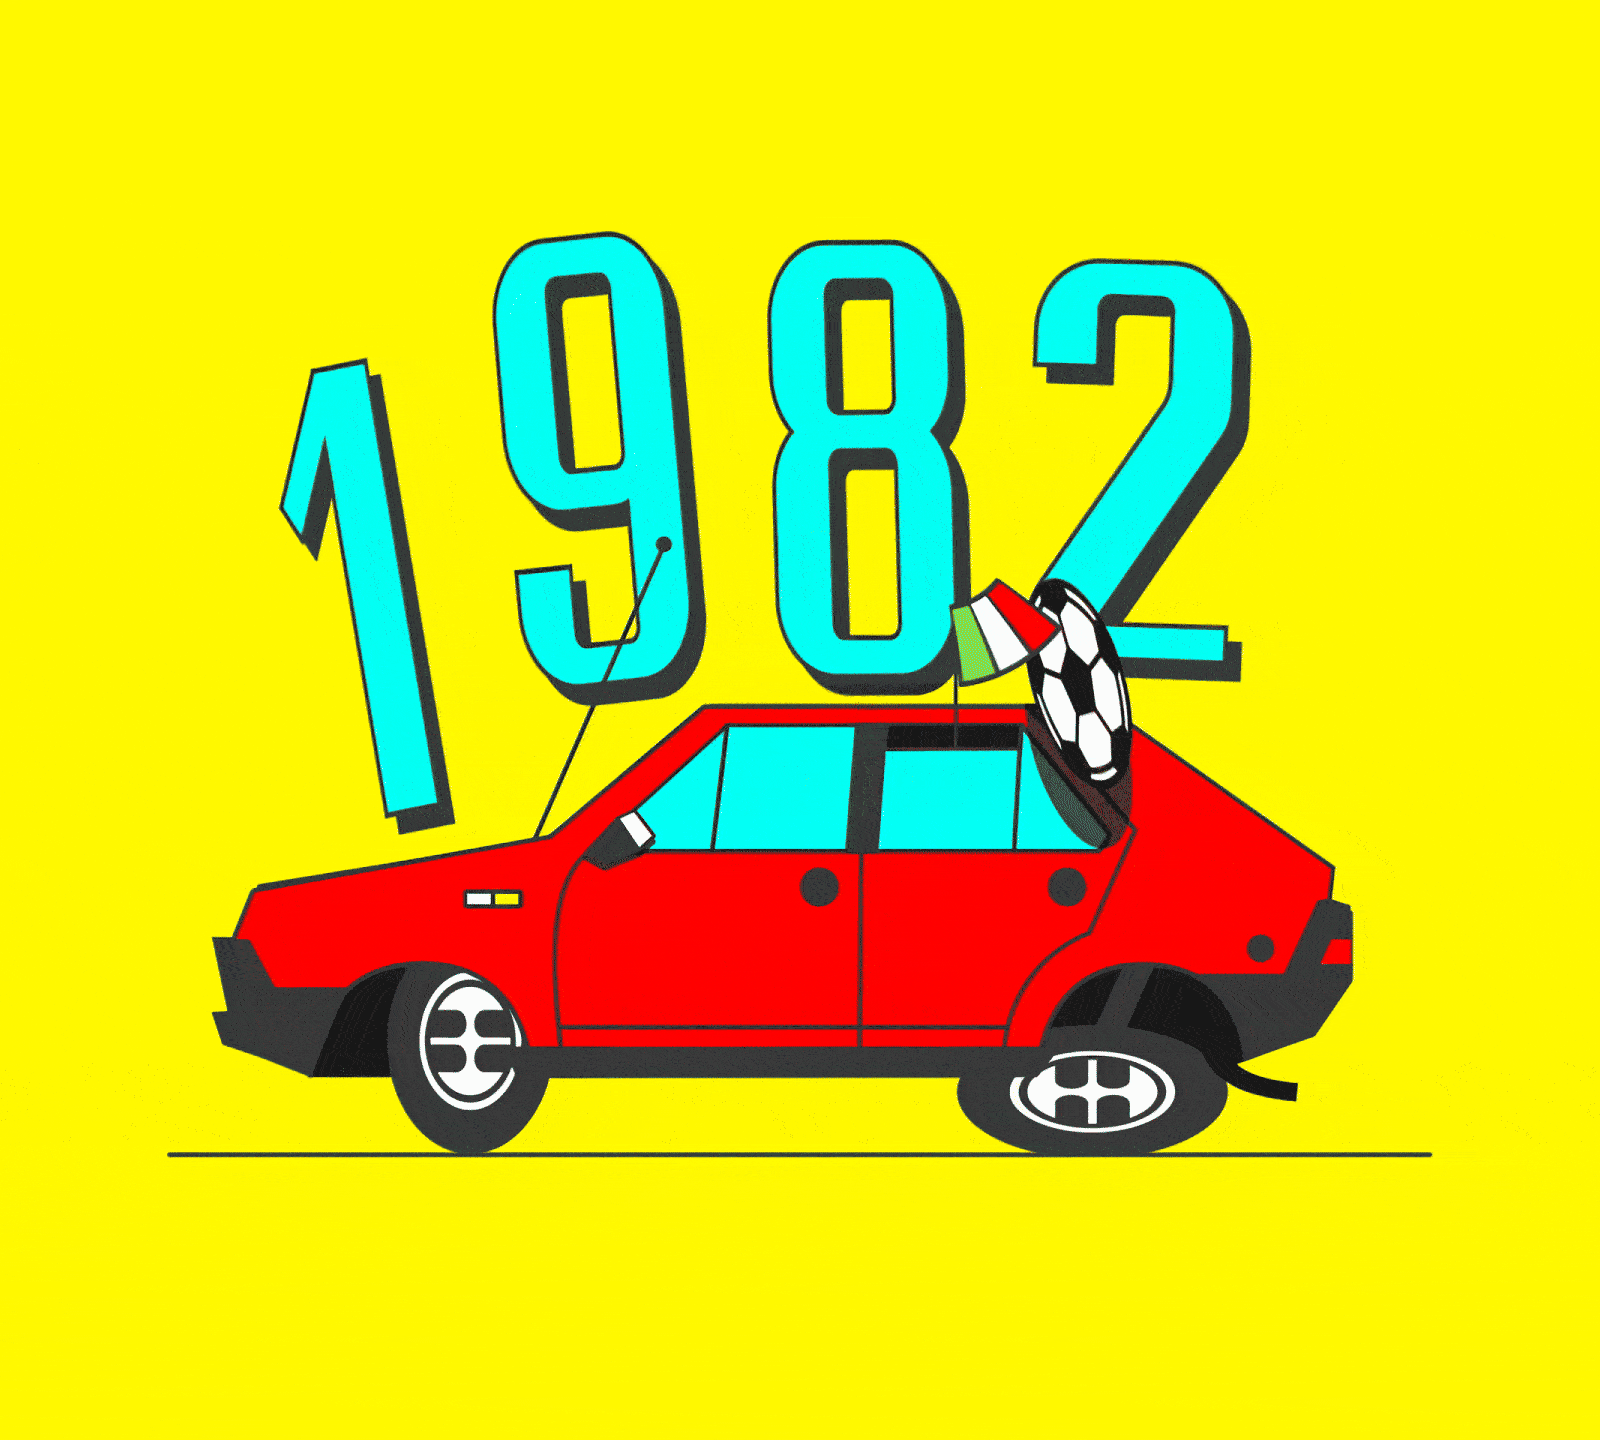 1982 🇮🇹 after effects aftereffects animation bounce car cartoon character animation character design filippo marchetti italian italy logo animation motion design motion graphics orange wedge orangewedge red rubberhose saturated squash stretch